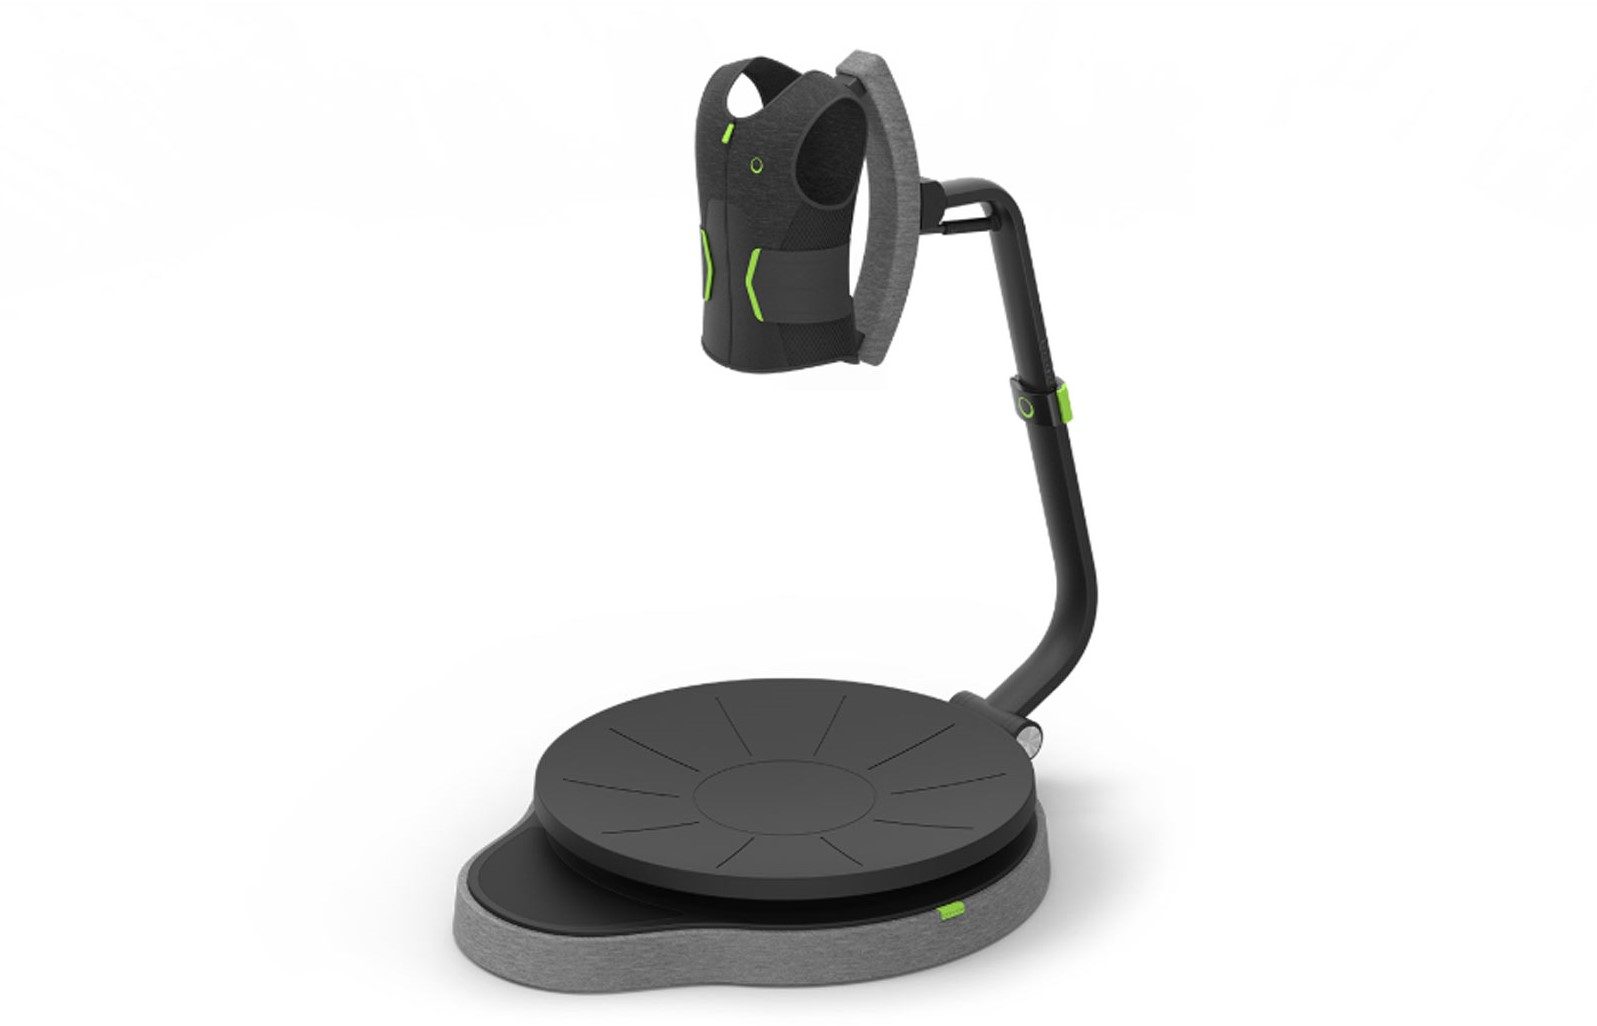 Virtuix Raises $19M in Crowd Investments for Omni One VR Treadmill – Road to